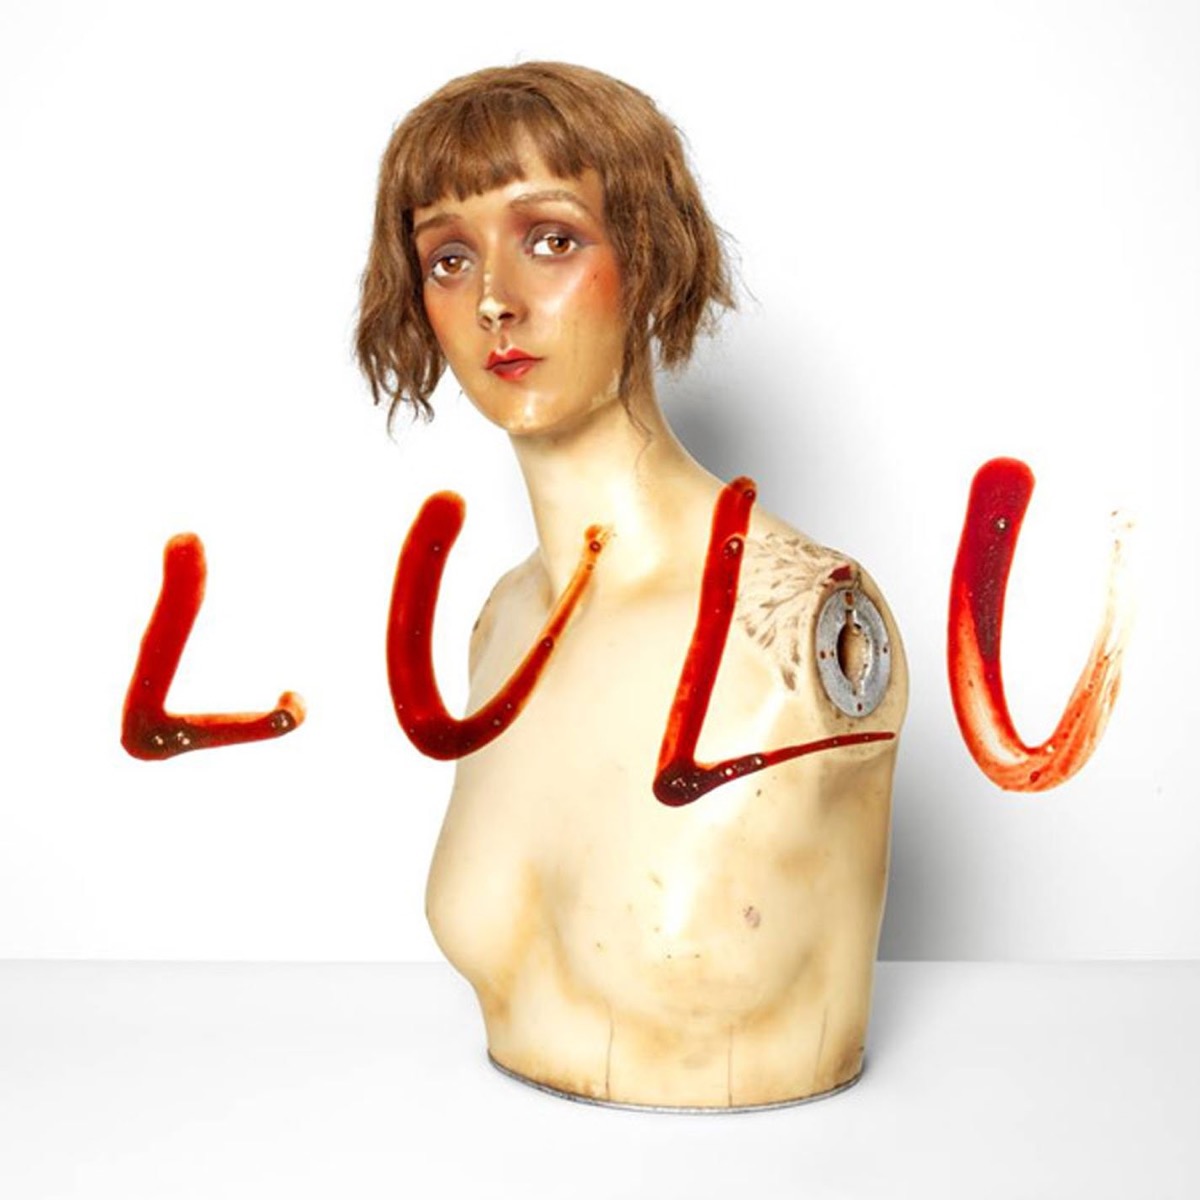 The album cover of "Lulu" by Lou Reed and Metallica